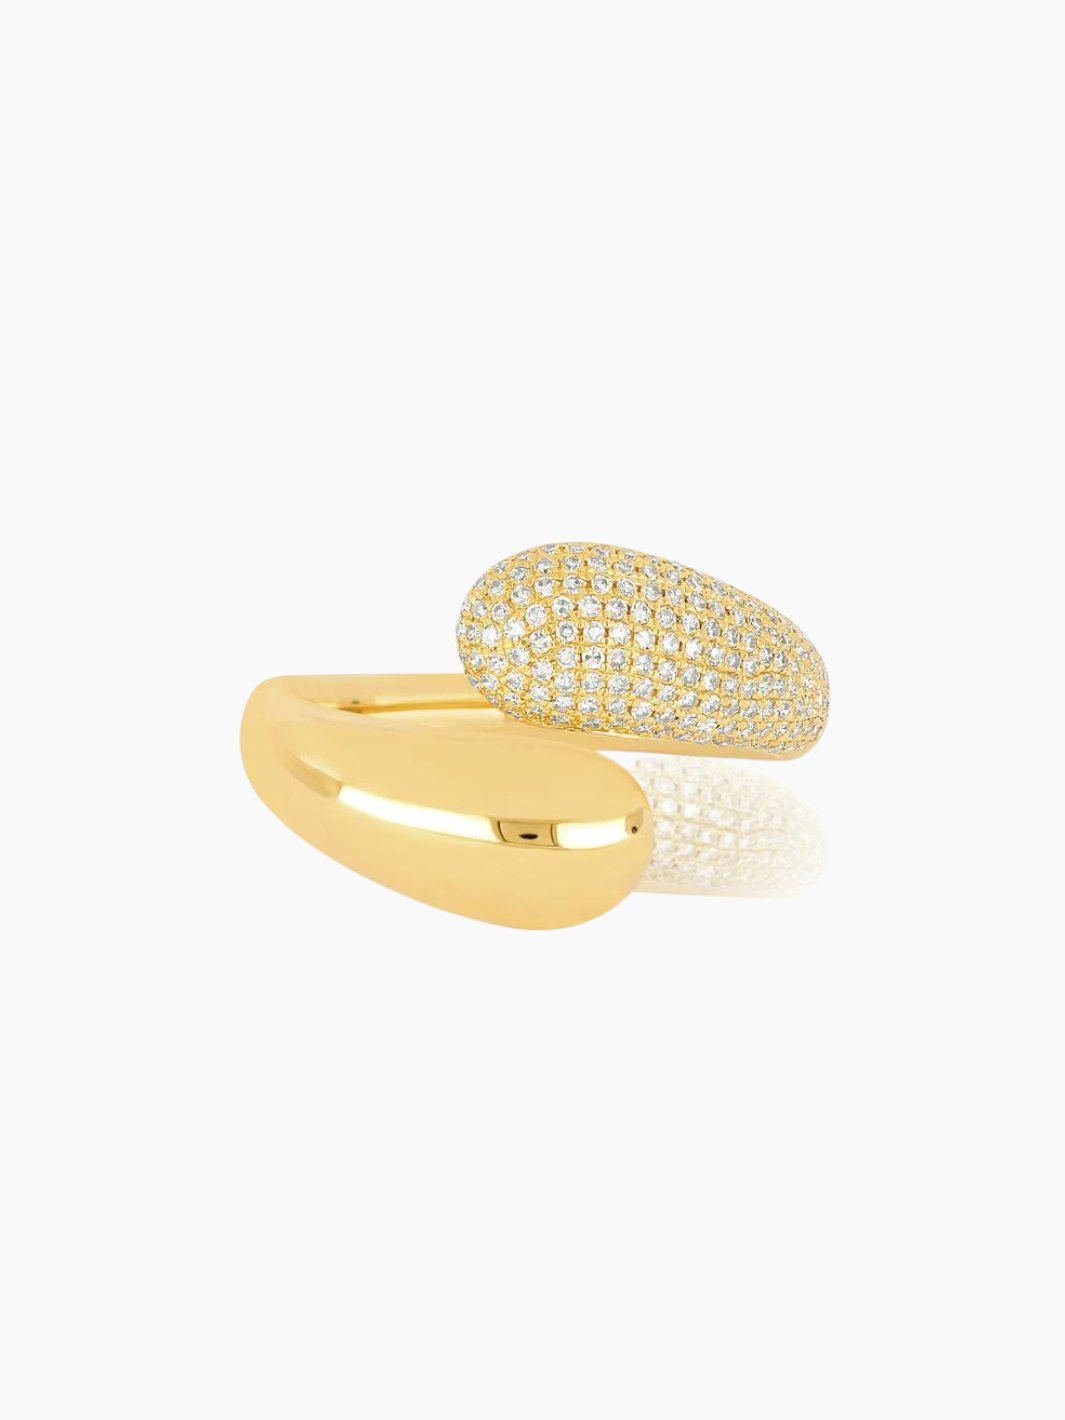 GOLD AND DIAMOND JUMBO DOUBLE RING - Romi Boutique